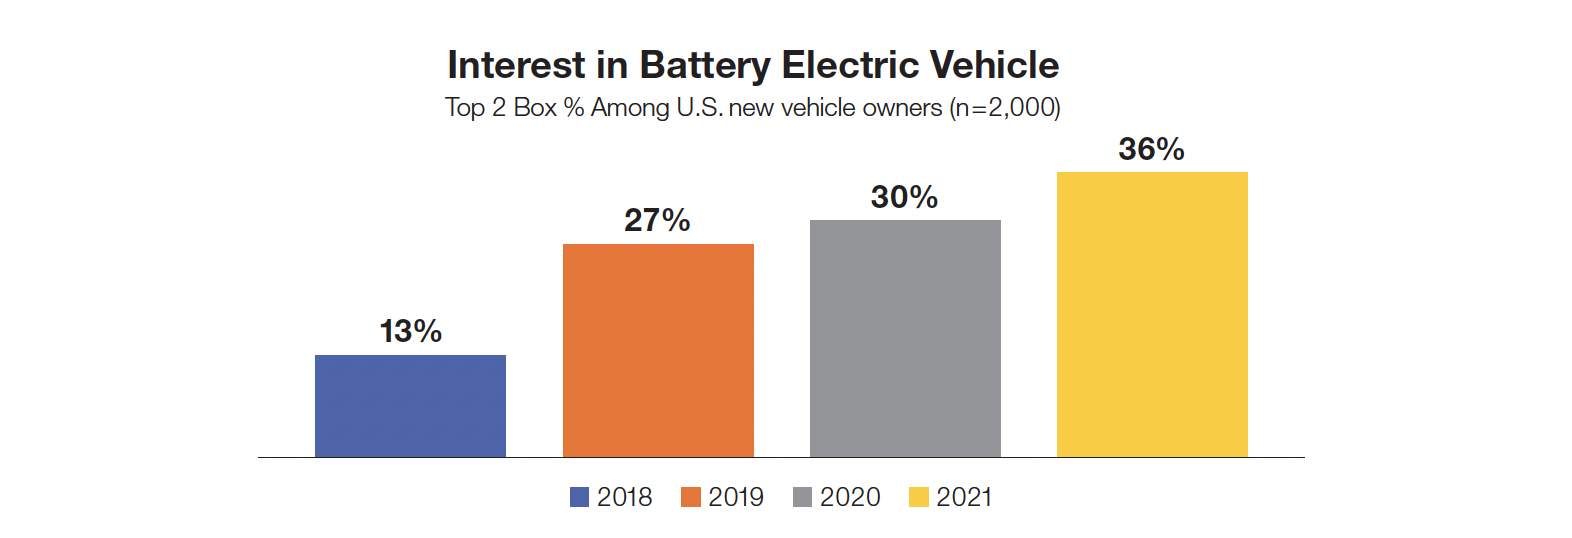 Interest in Battery Electric Vehicles